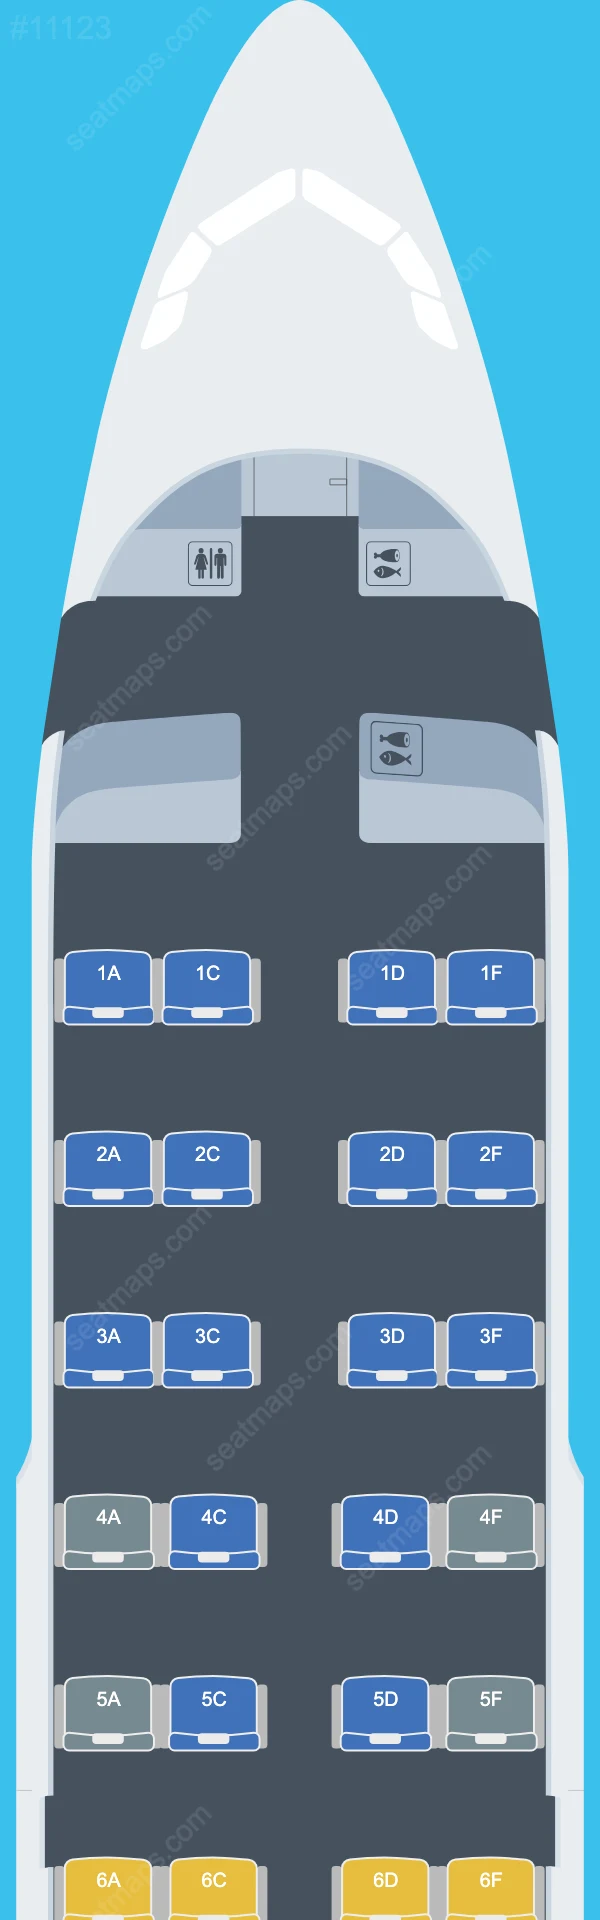 Skytraders Airbus A319 Seat Maps A319-100